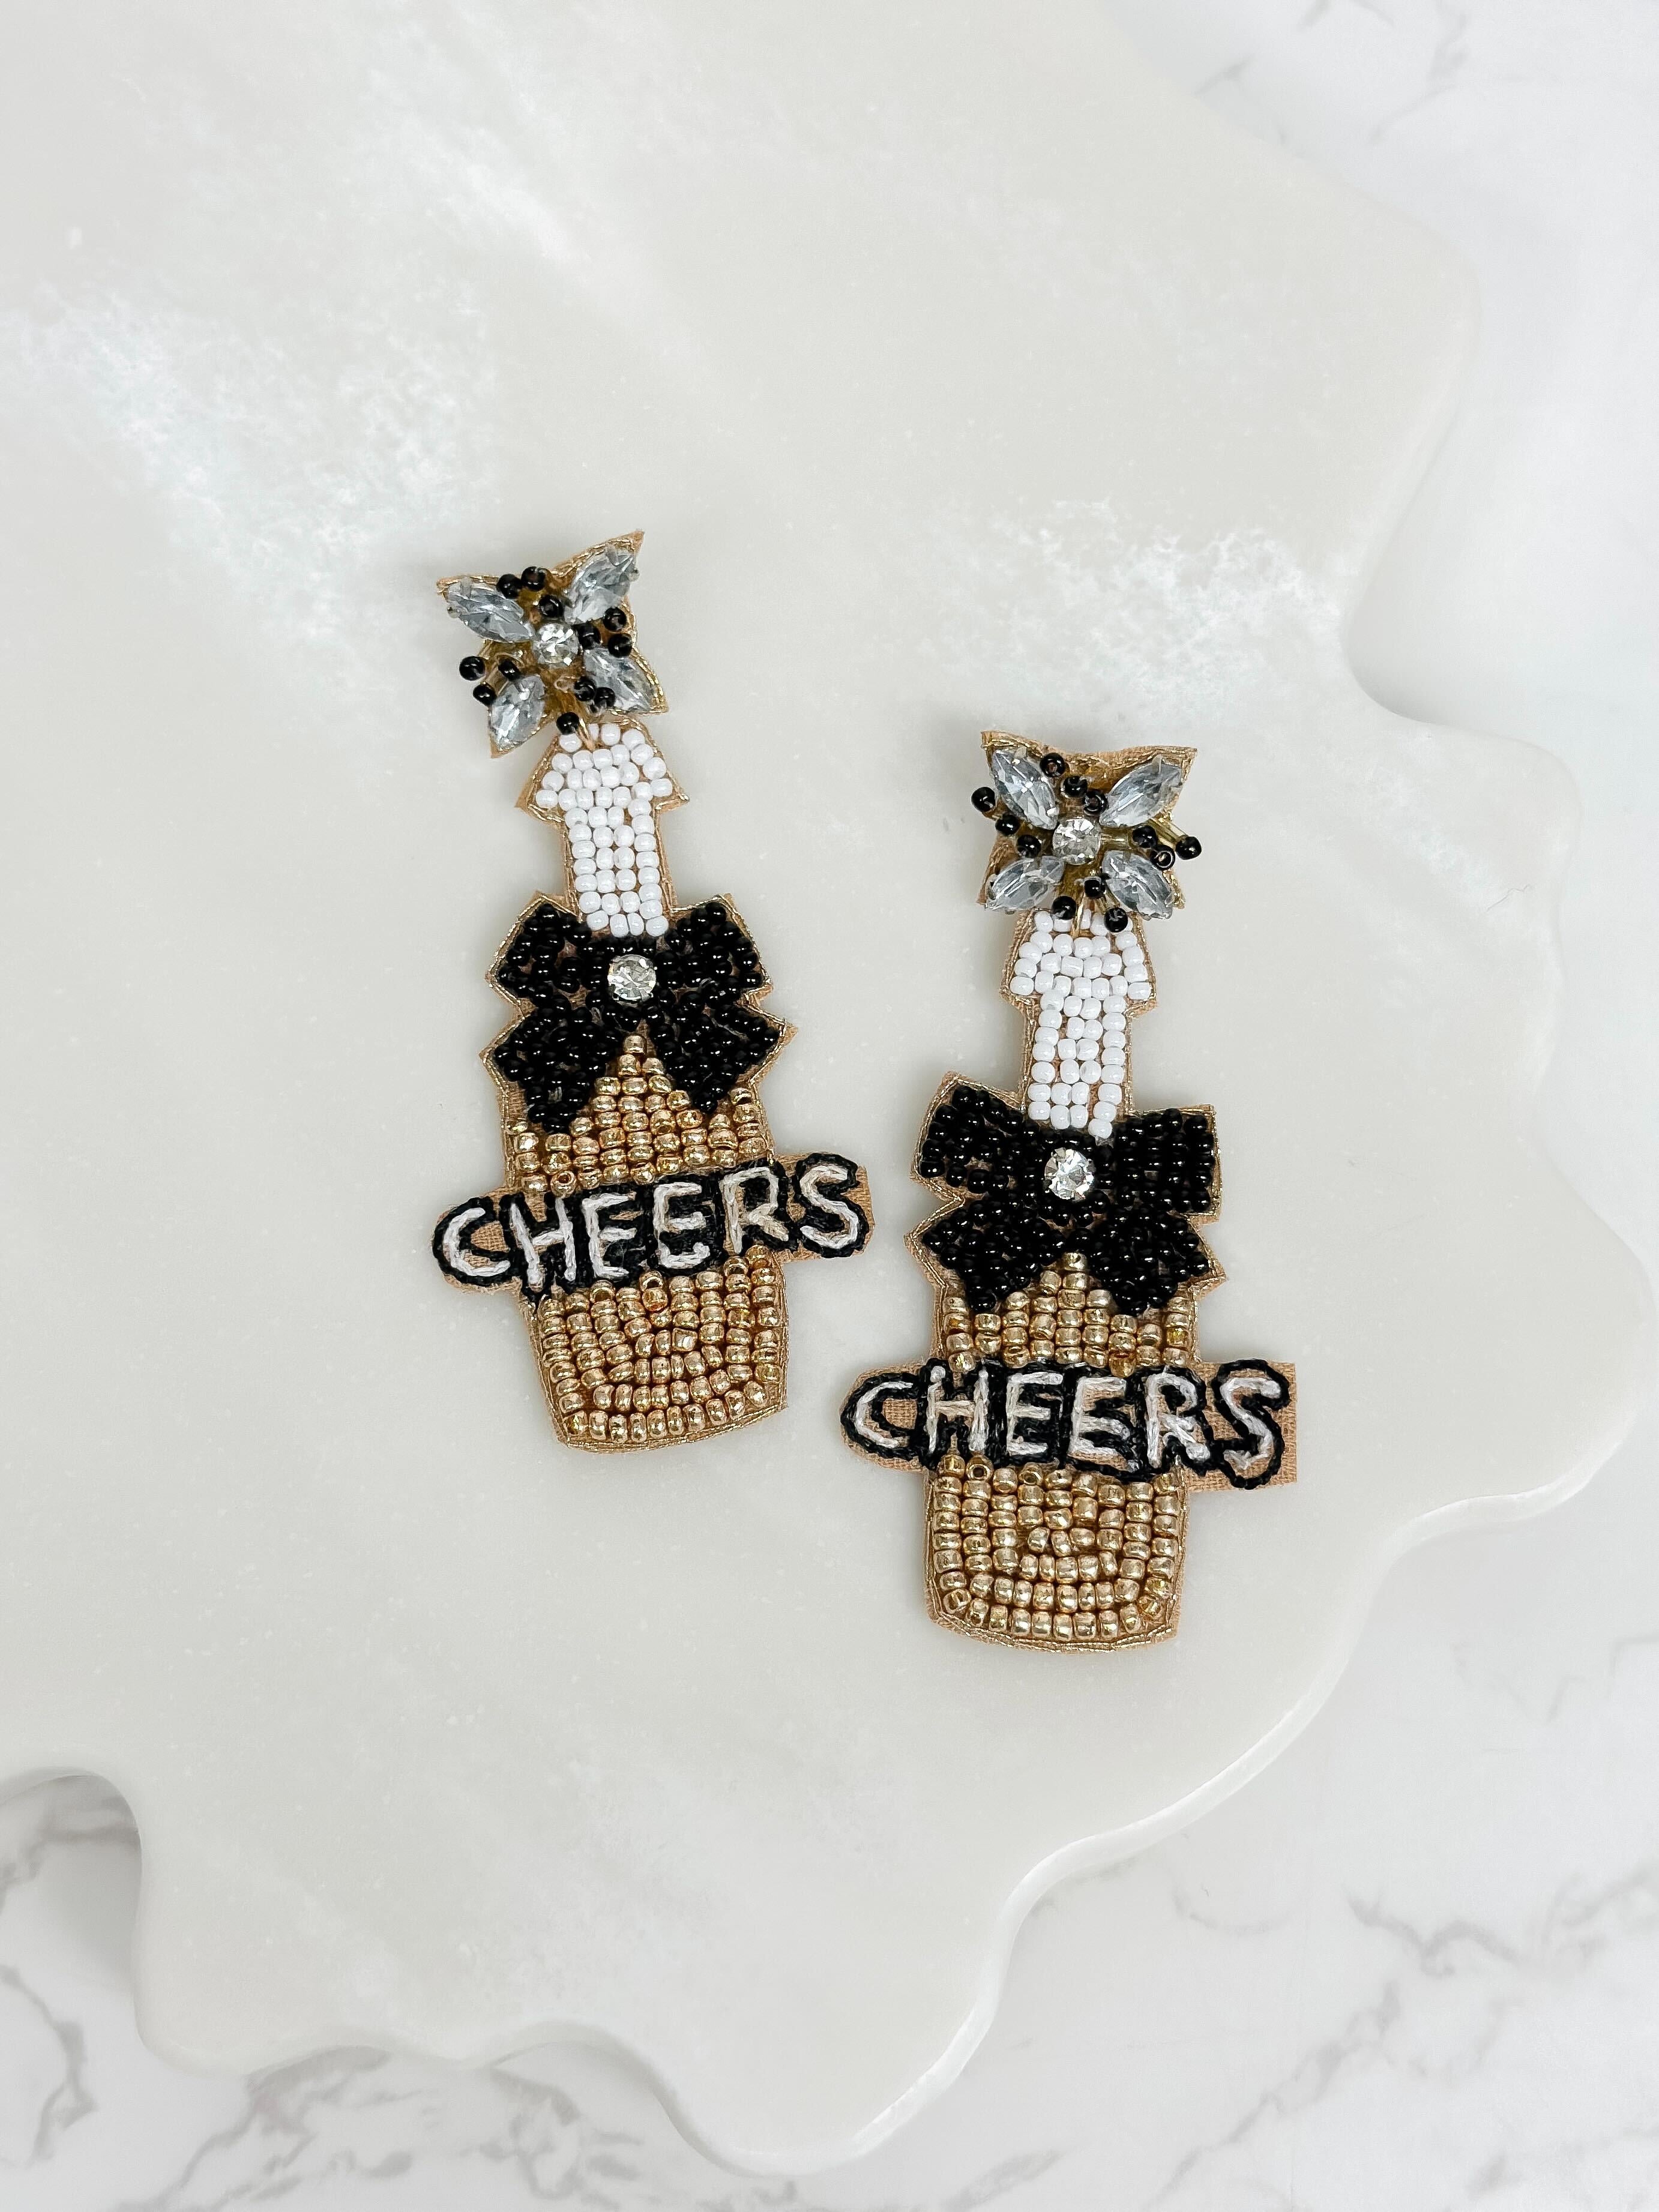 'Cheers' Champagne Statement Earrings